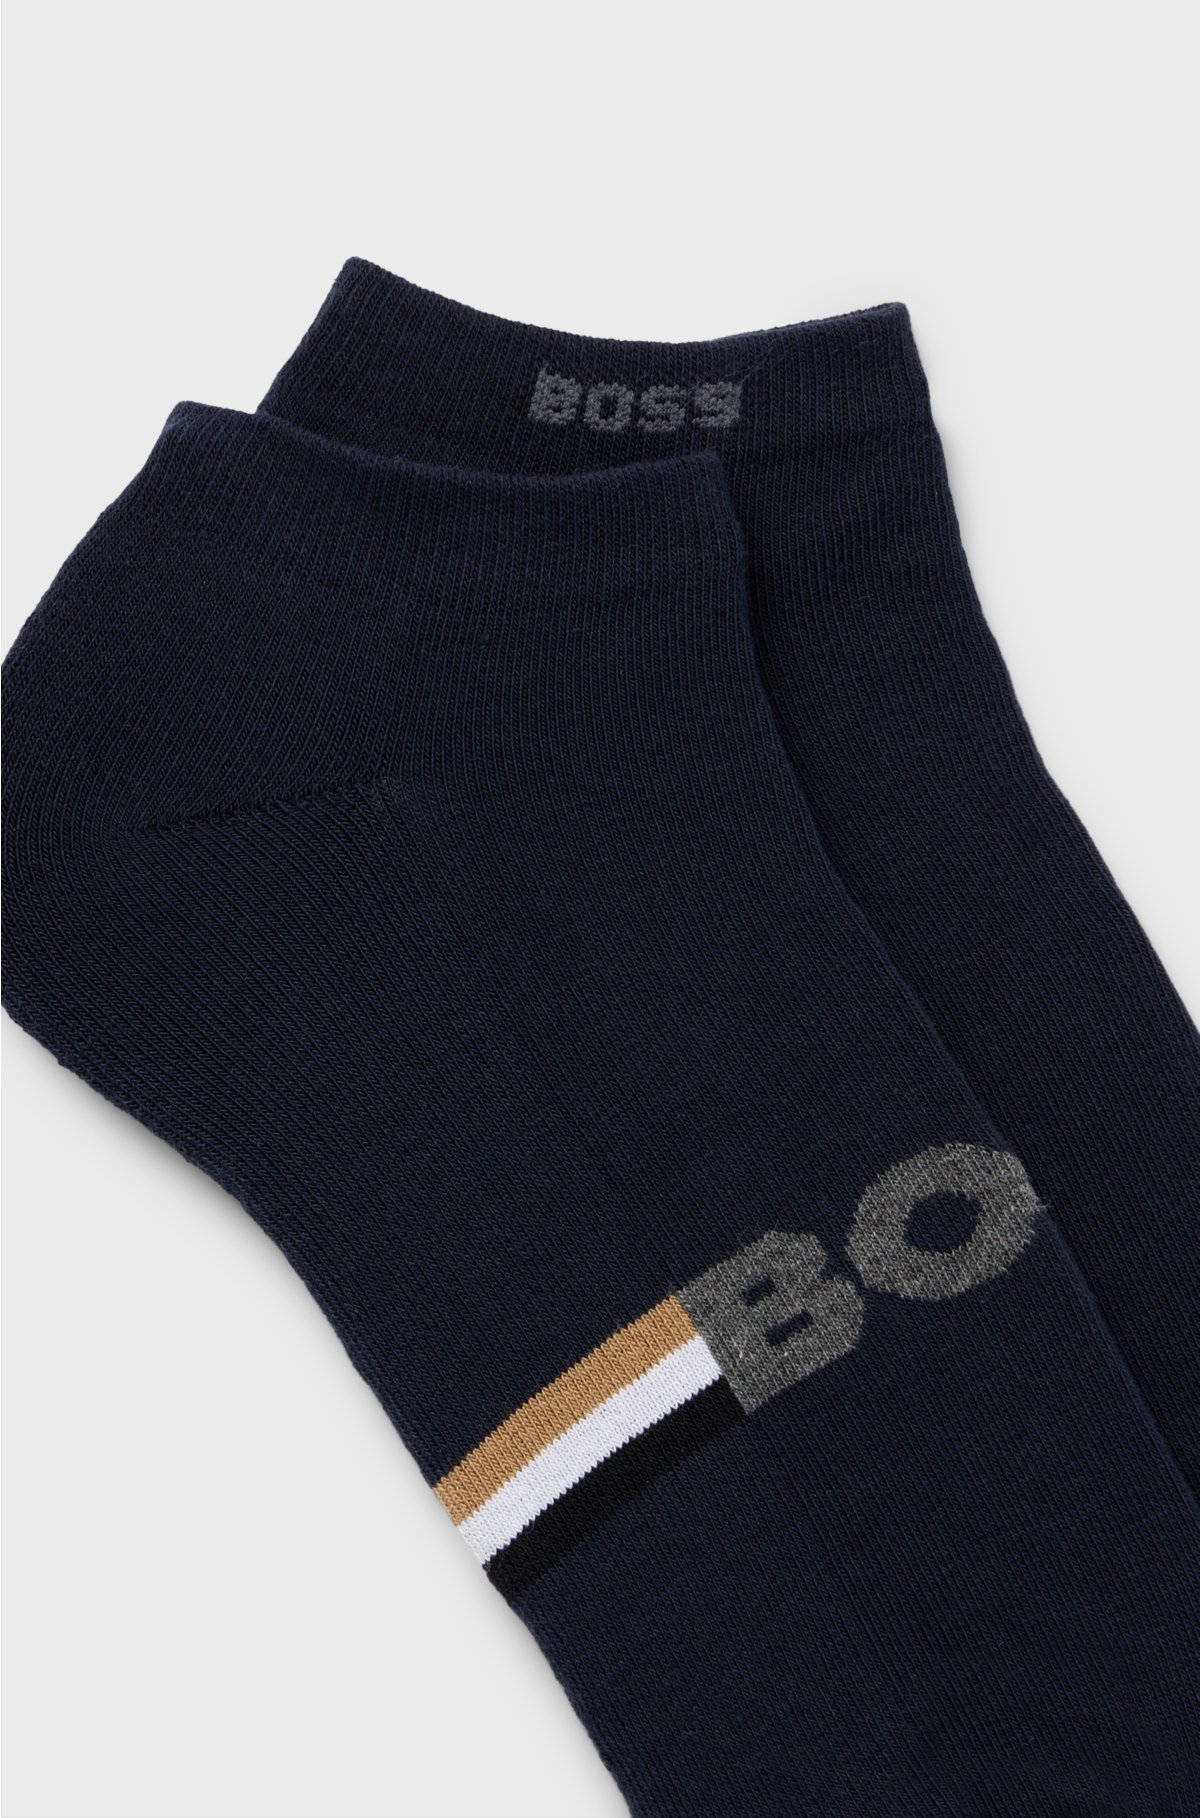 Two-pack of ankle-length socks in a cotton blend, Dark Blue